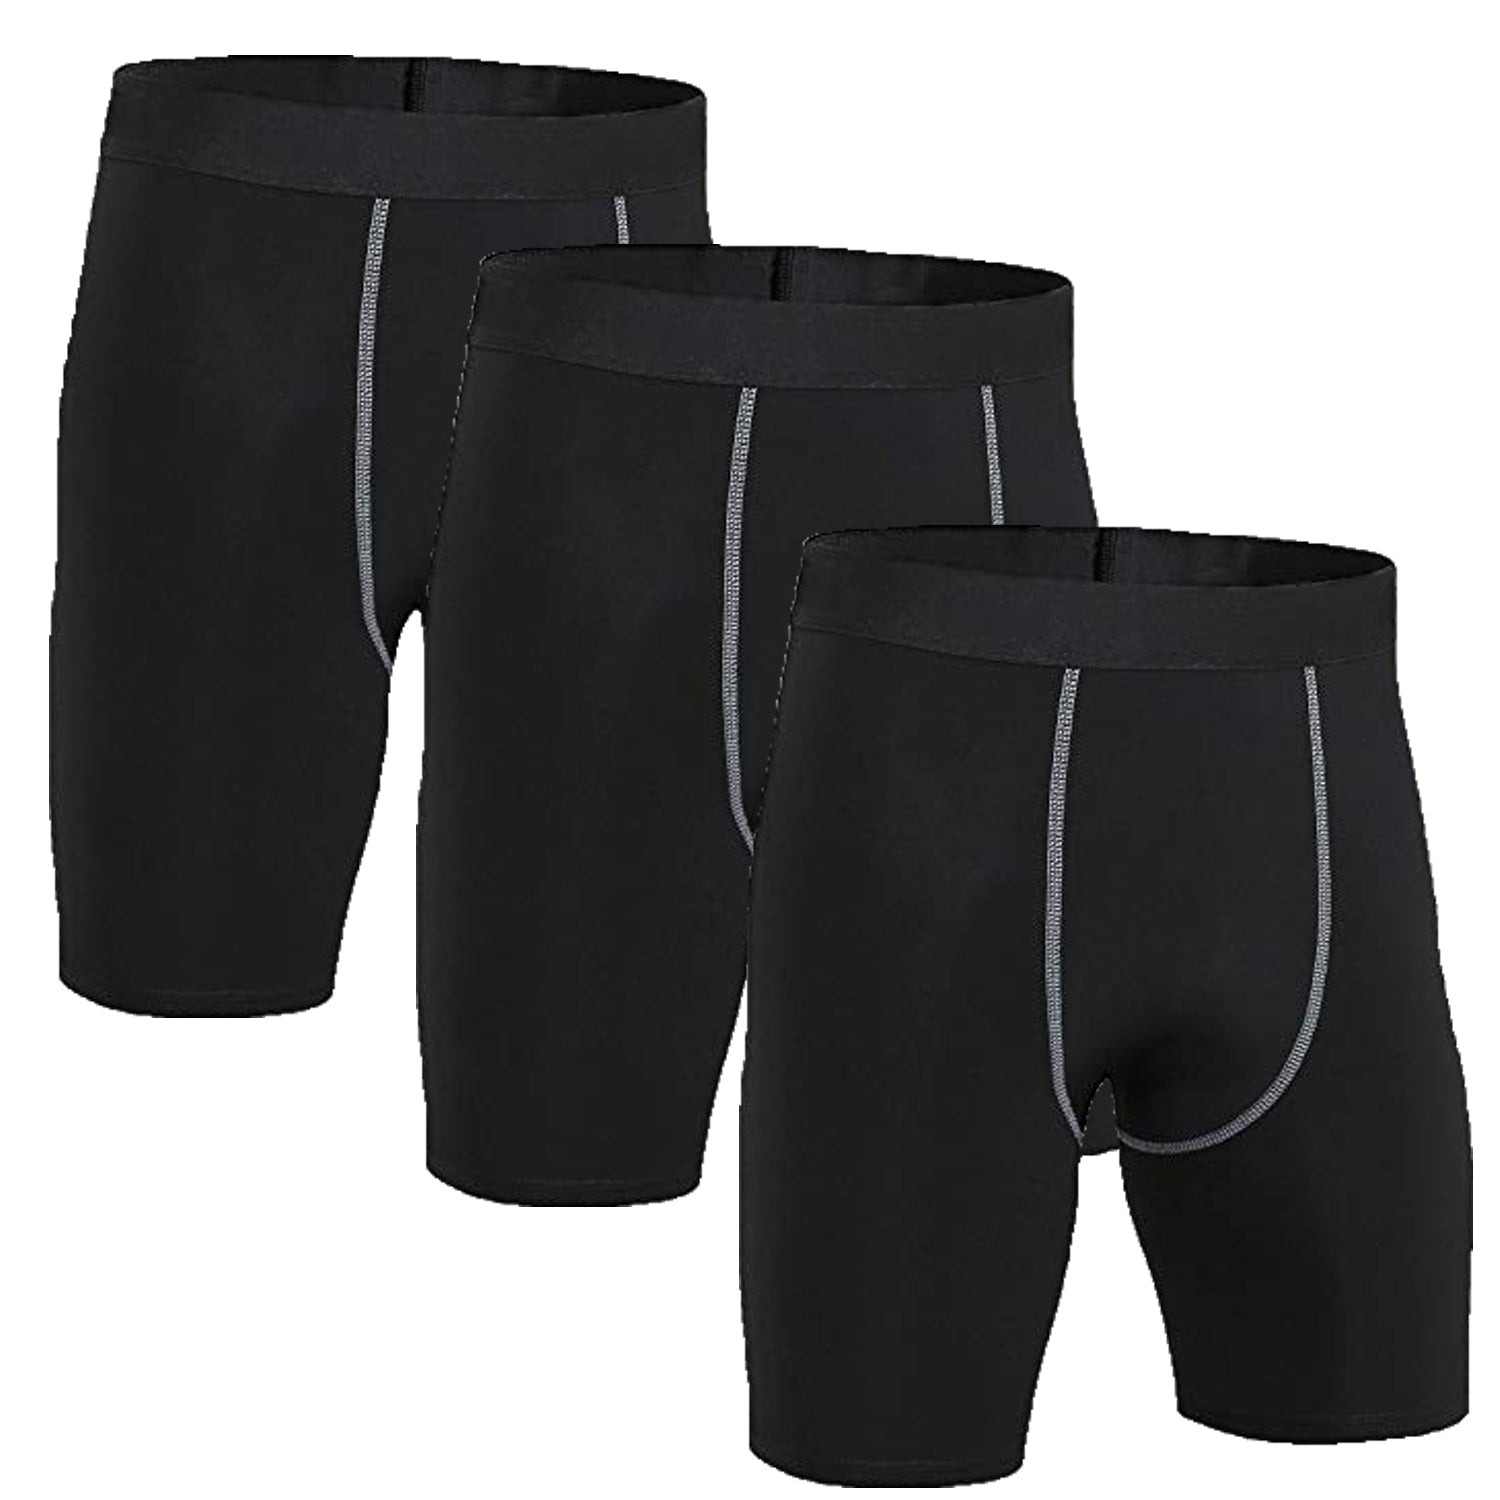 EQUIPO performance stretch BOXER BRIEFS 2 pair Size S 28-30 NEW - La Paz  County Sheriff's Office Dedicated to Service